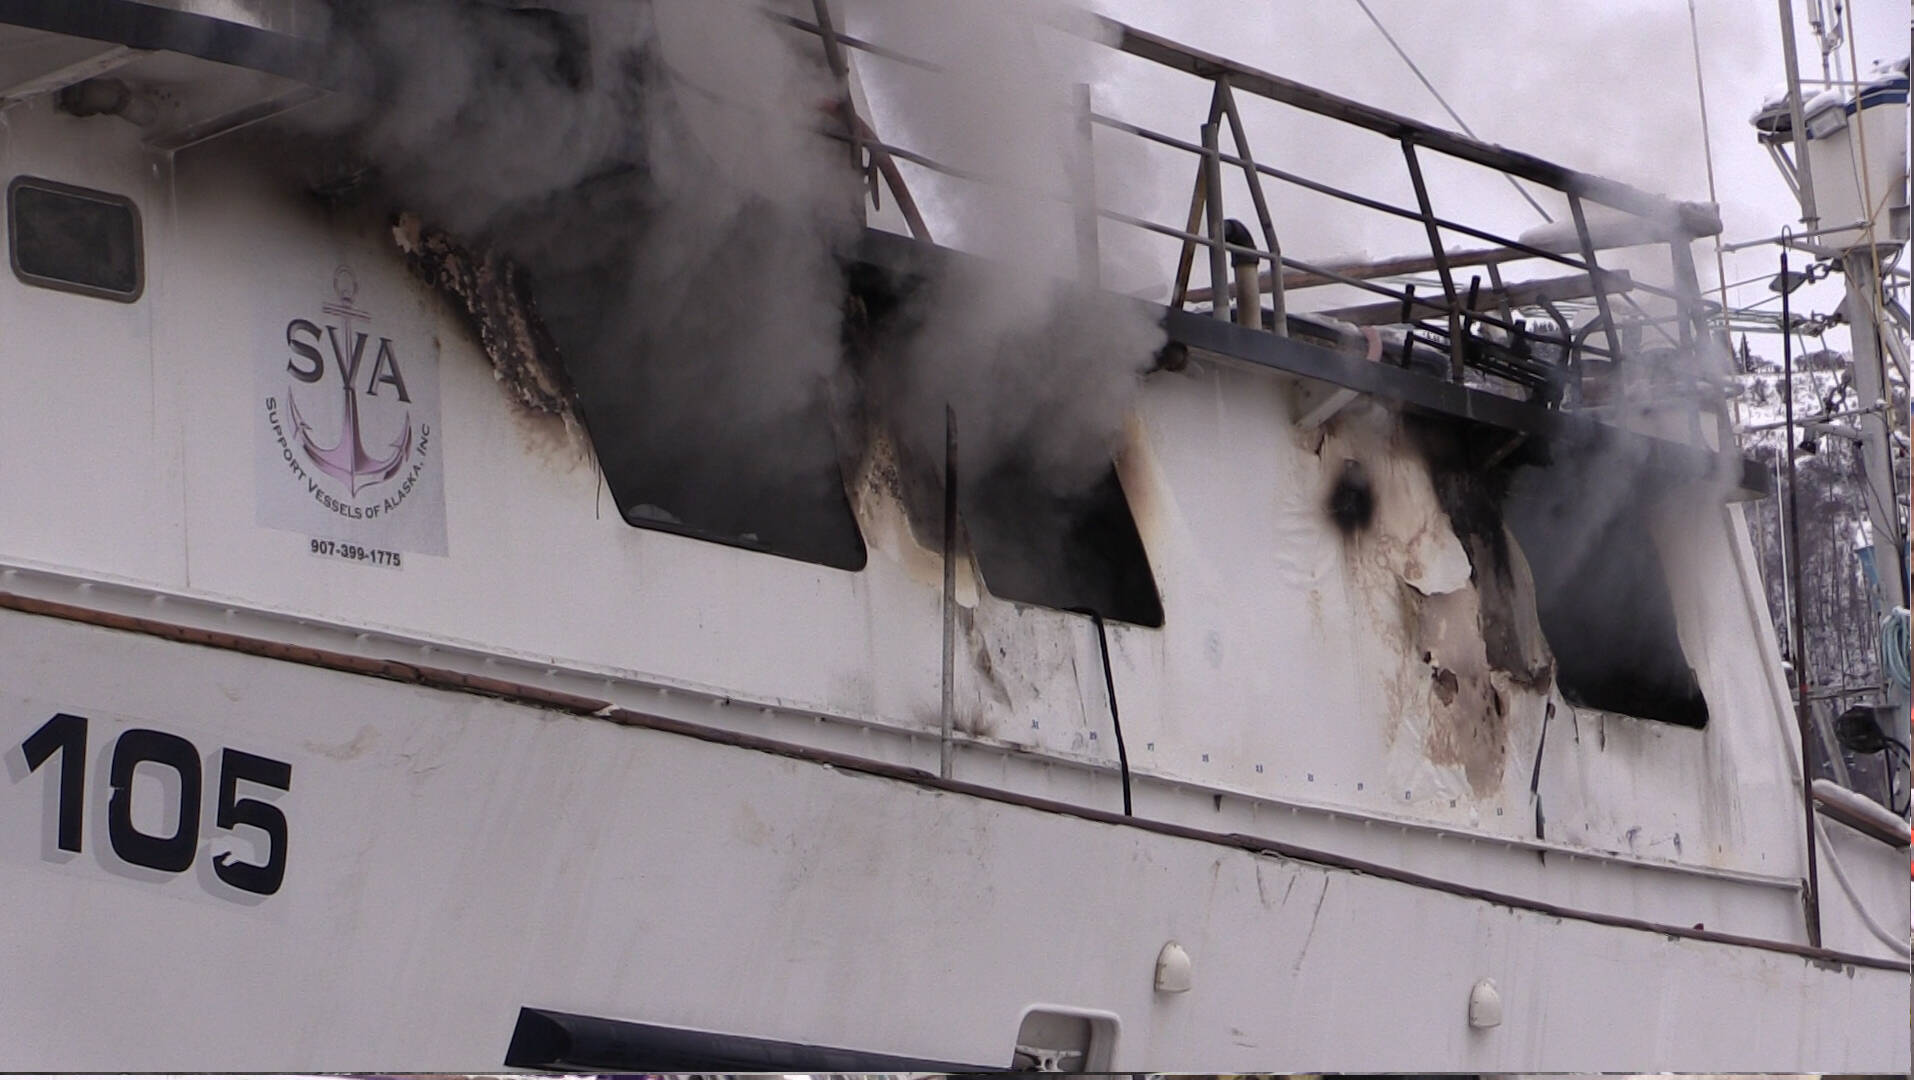 Smoke emerges from R/V Qualifier, which caught on fire in the Northern Enterprises Boatyard on Kachemak Drive, Jan. 19.